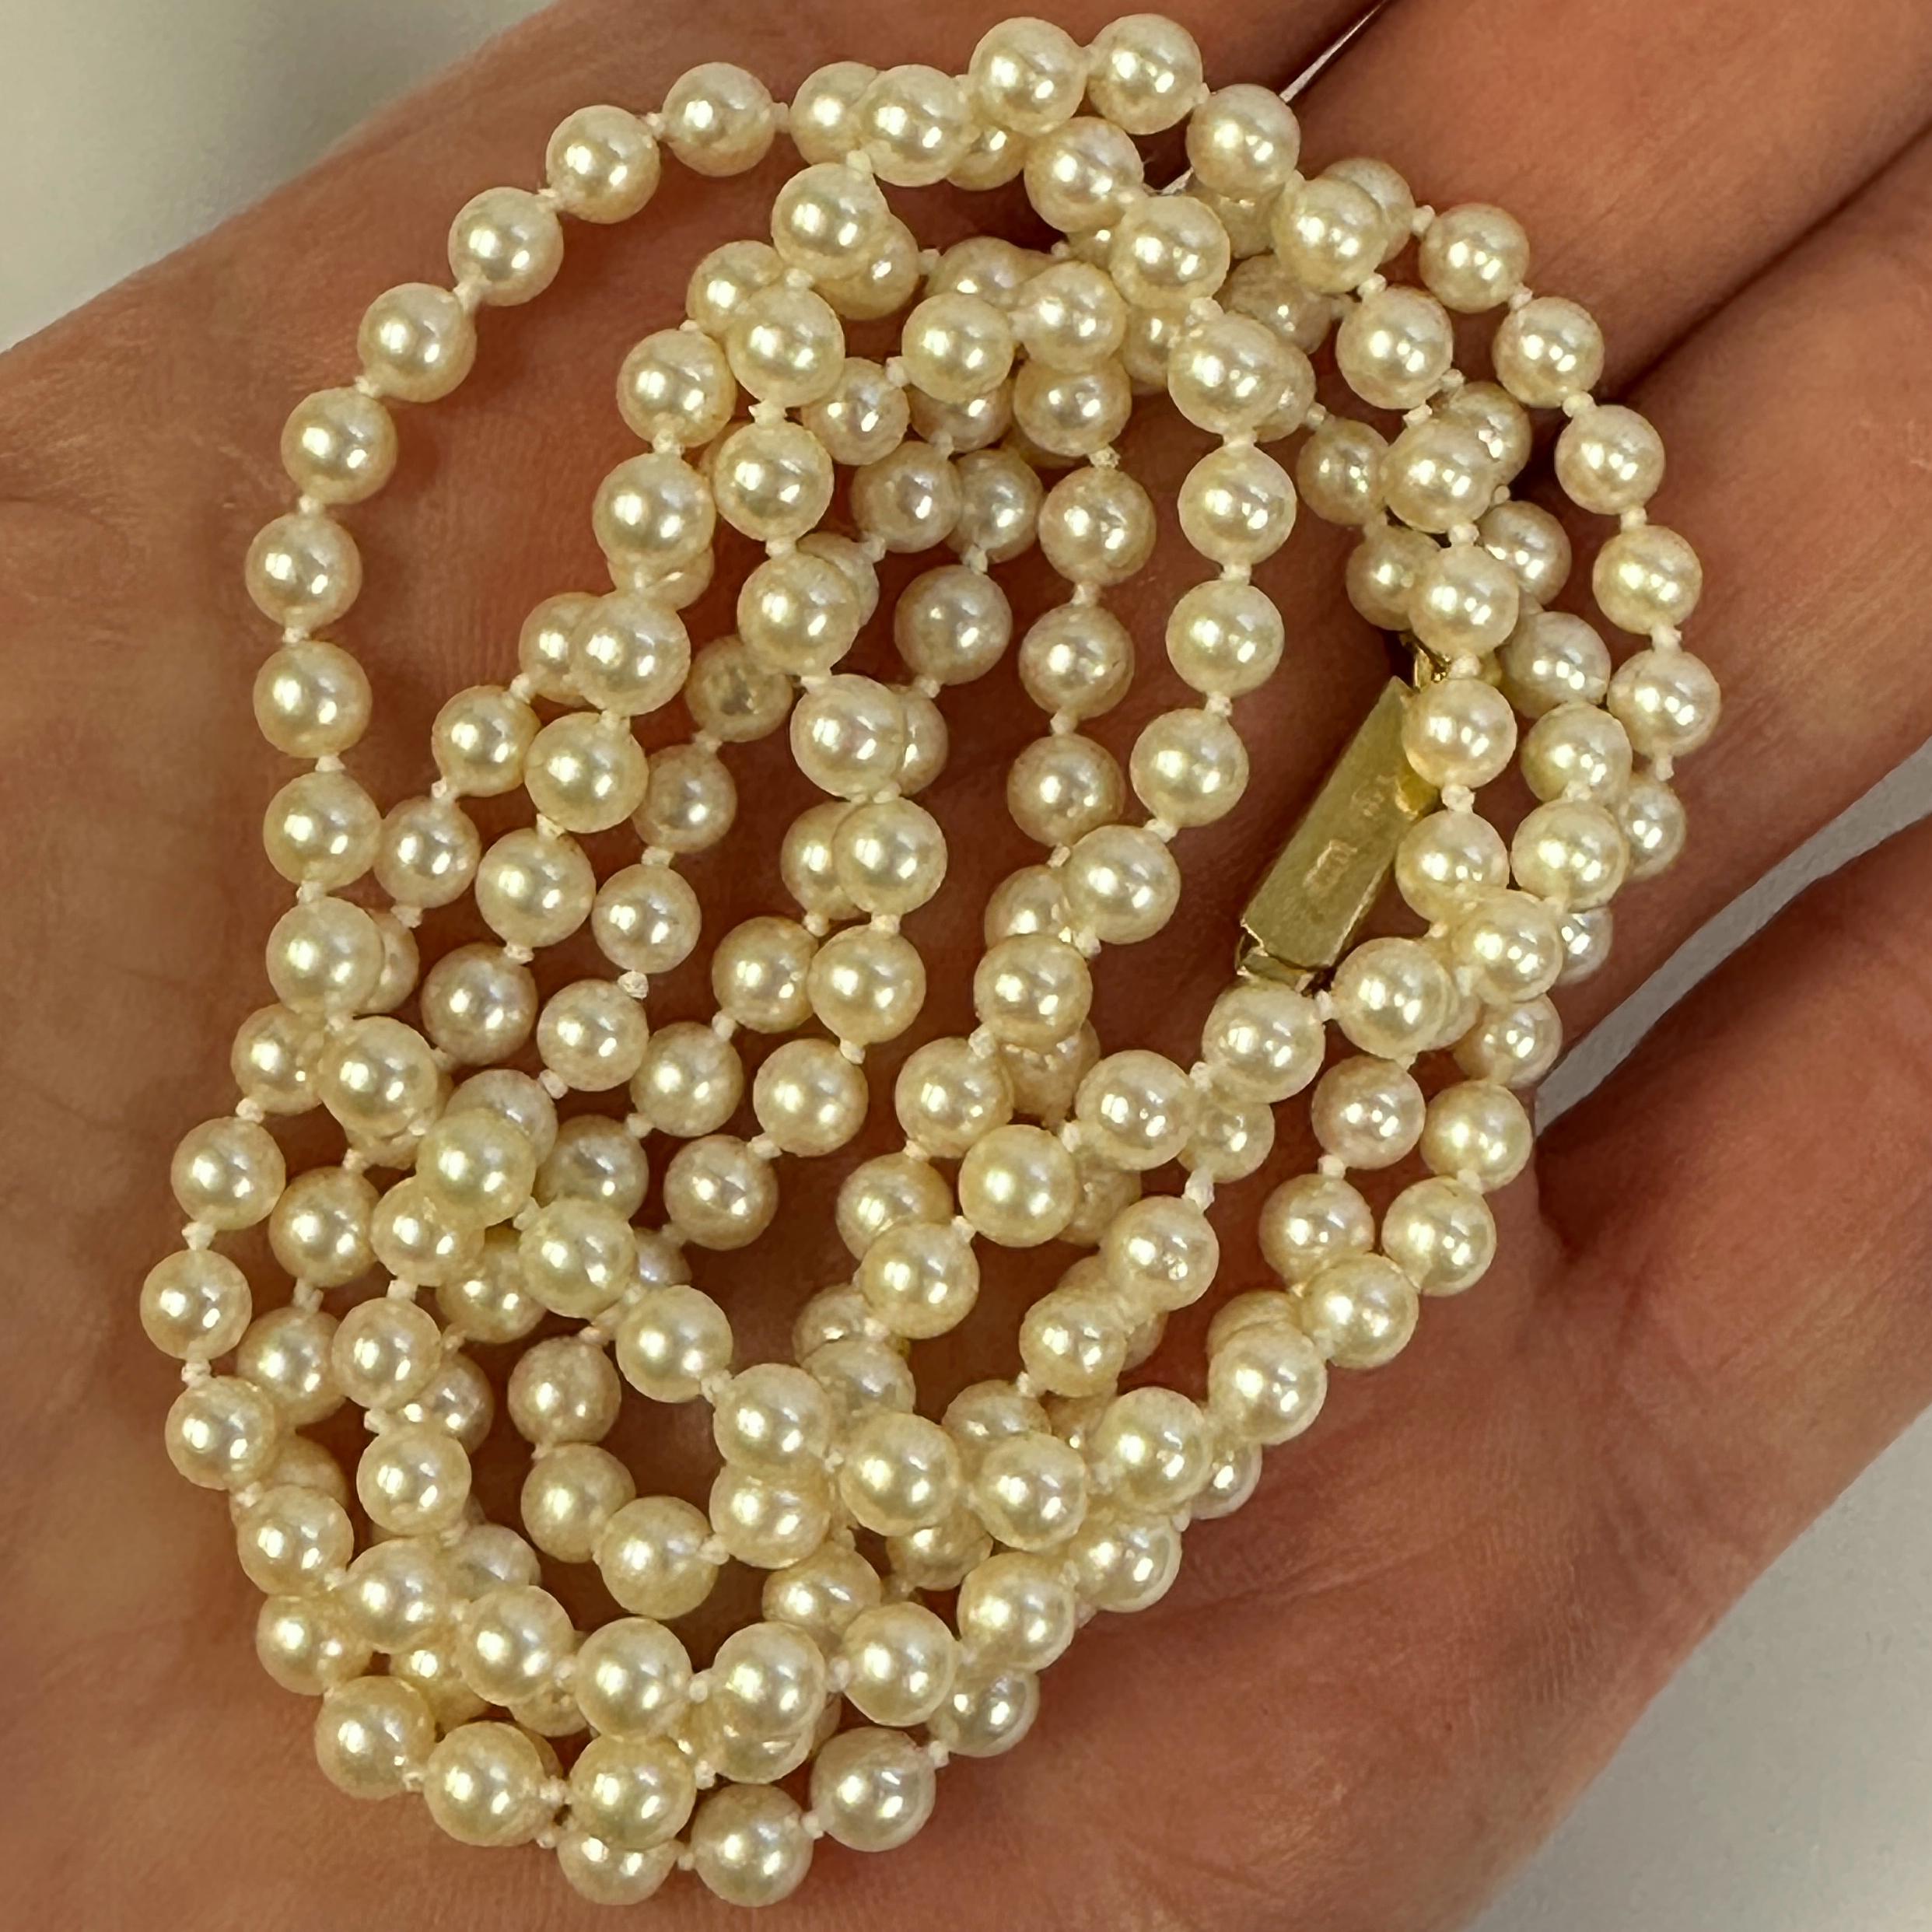 Opera Length Strand of Japanese Akoya Cultured Pearls with 14k Gold Clasp 4